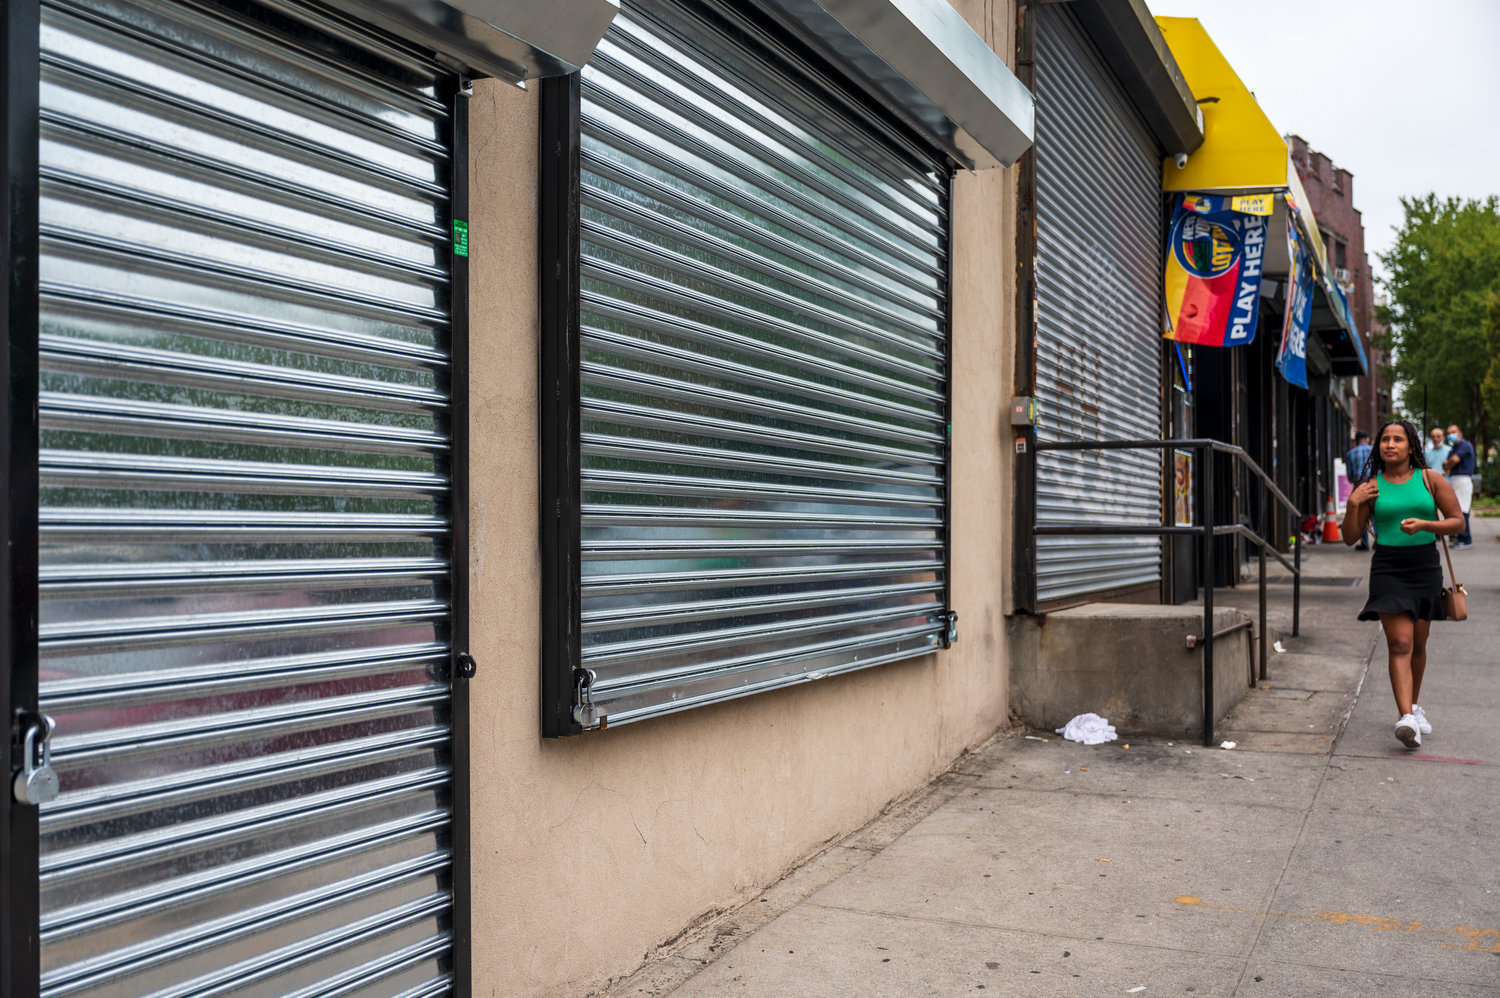 What once used to be a storefront across from Van Cortlandt Park is now expected to become a shelter for more than 100 single men beginning in 2023 at 6661 Broadway.